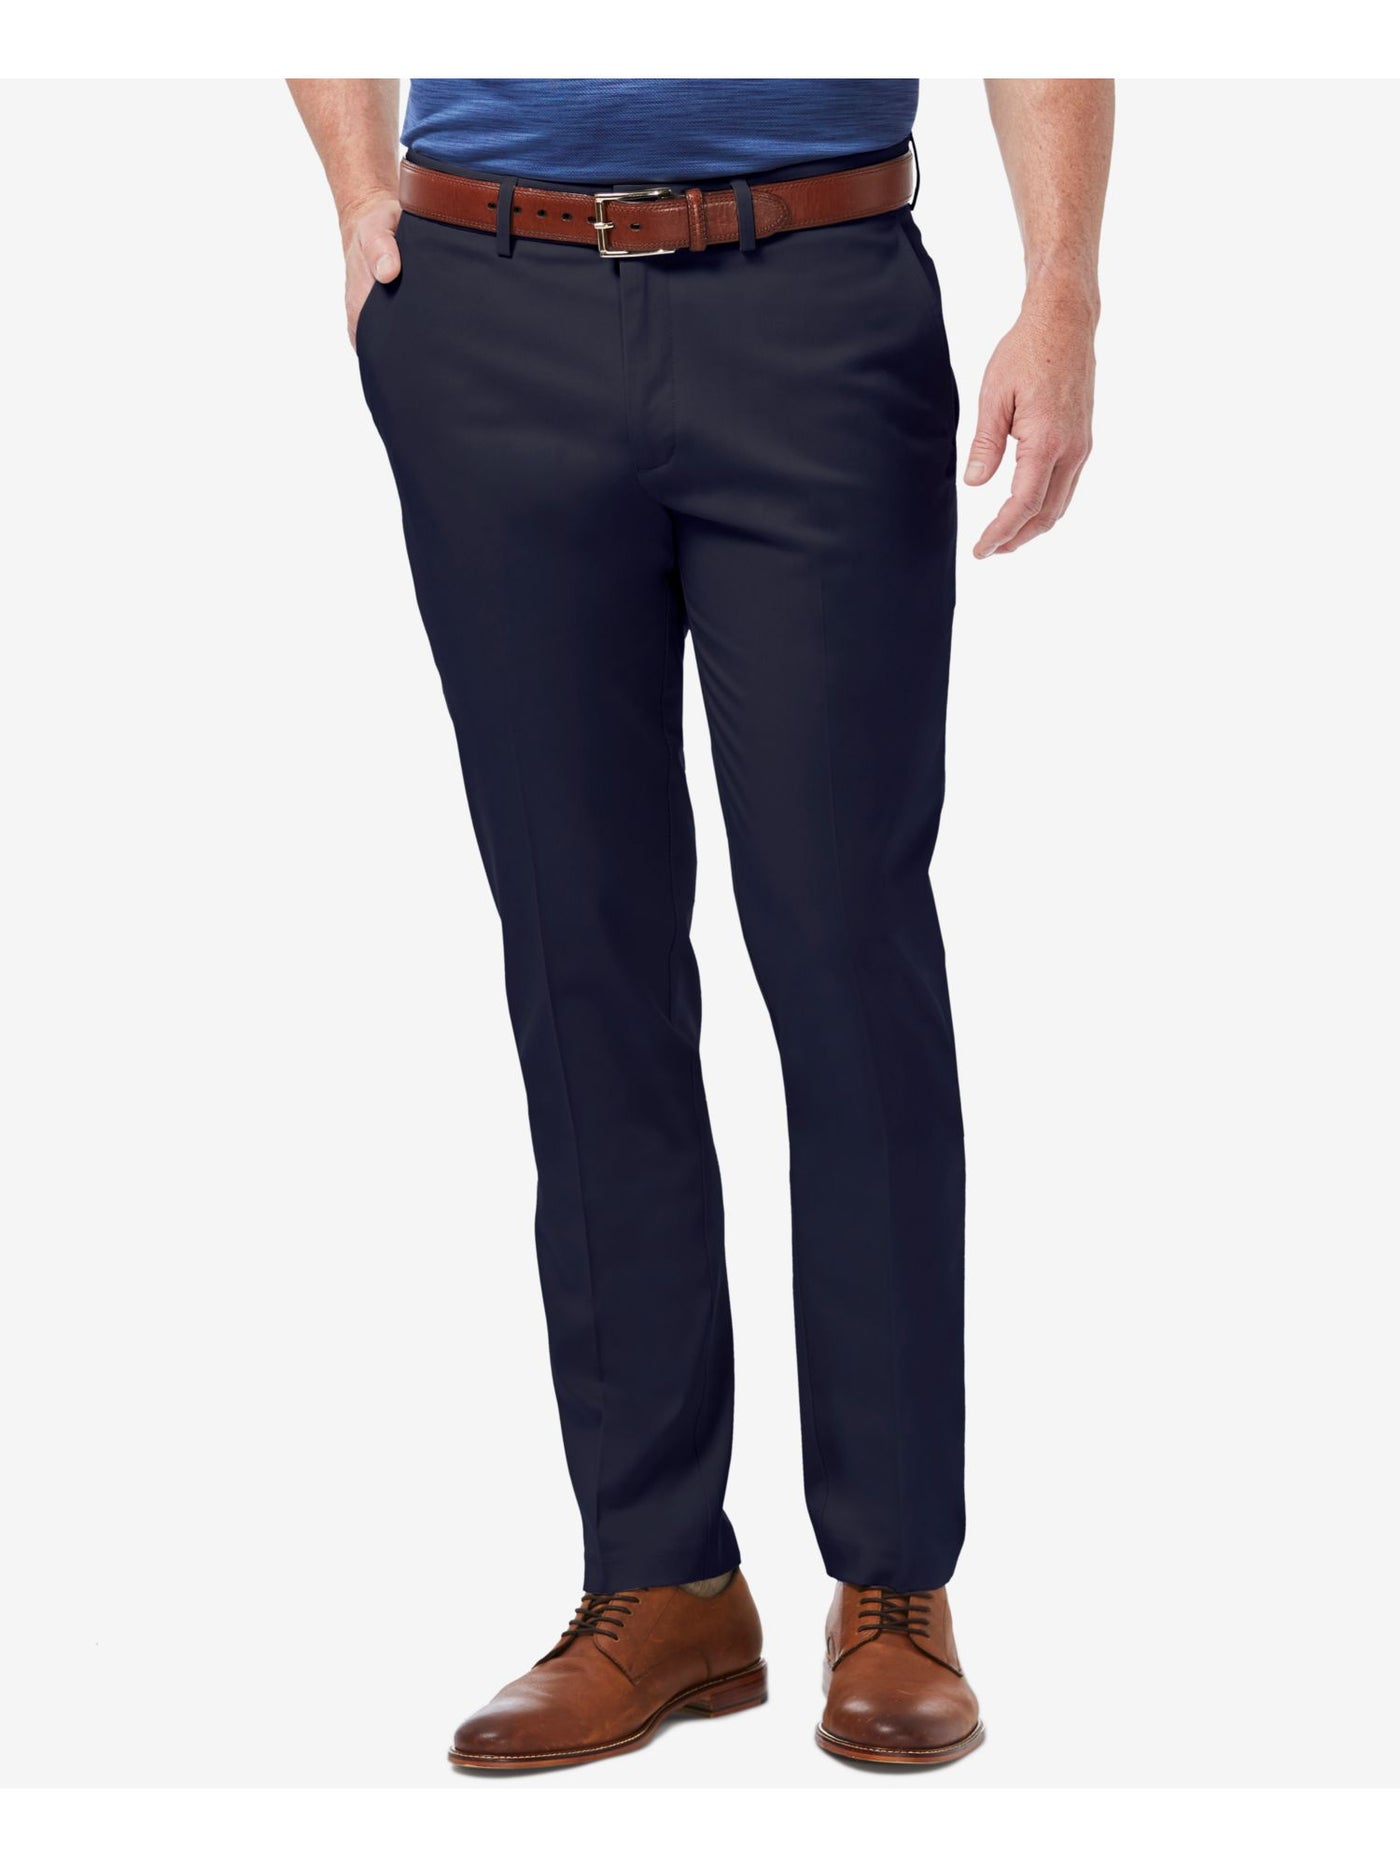 HAGGAR Mens Navy Stretch, Tapered, Classic Fit Pants 38W\32L